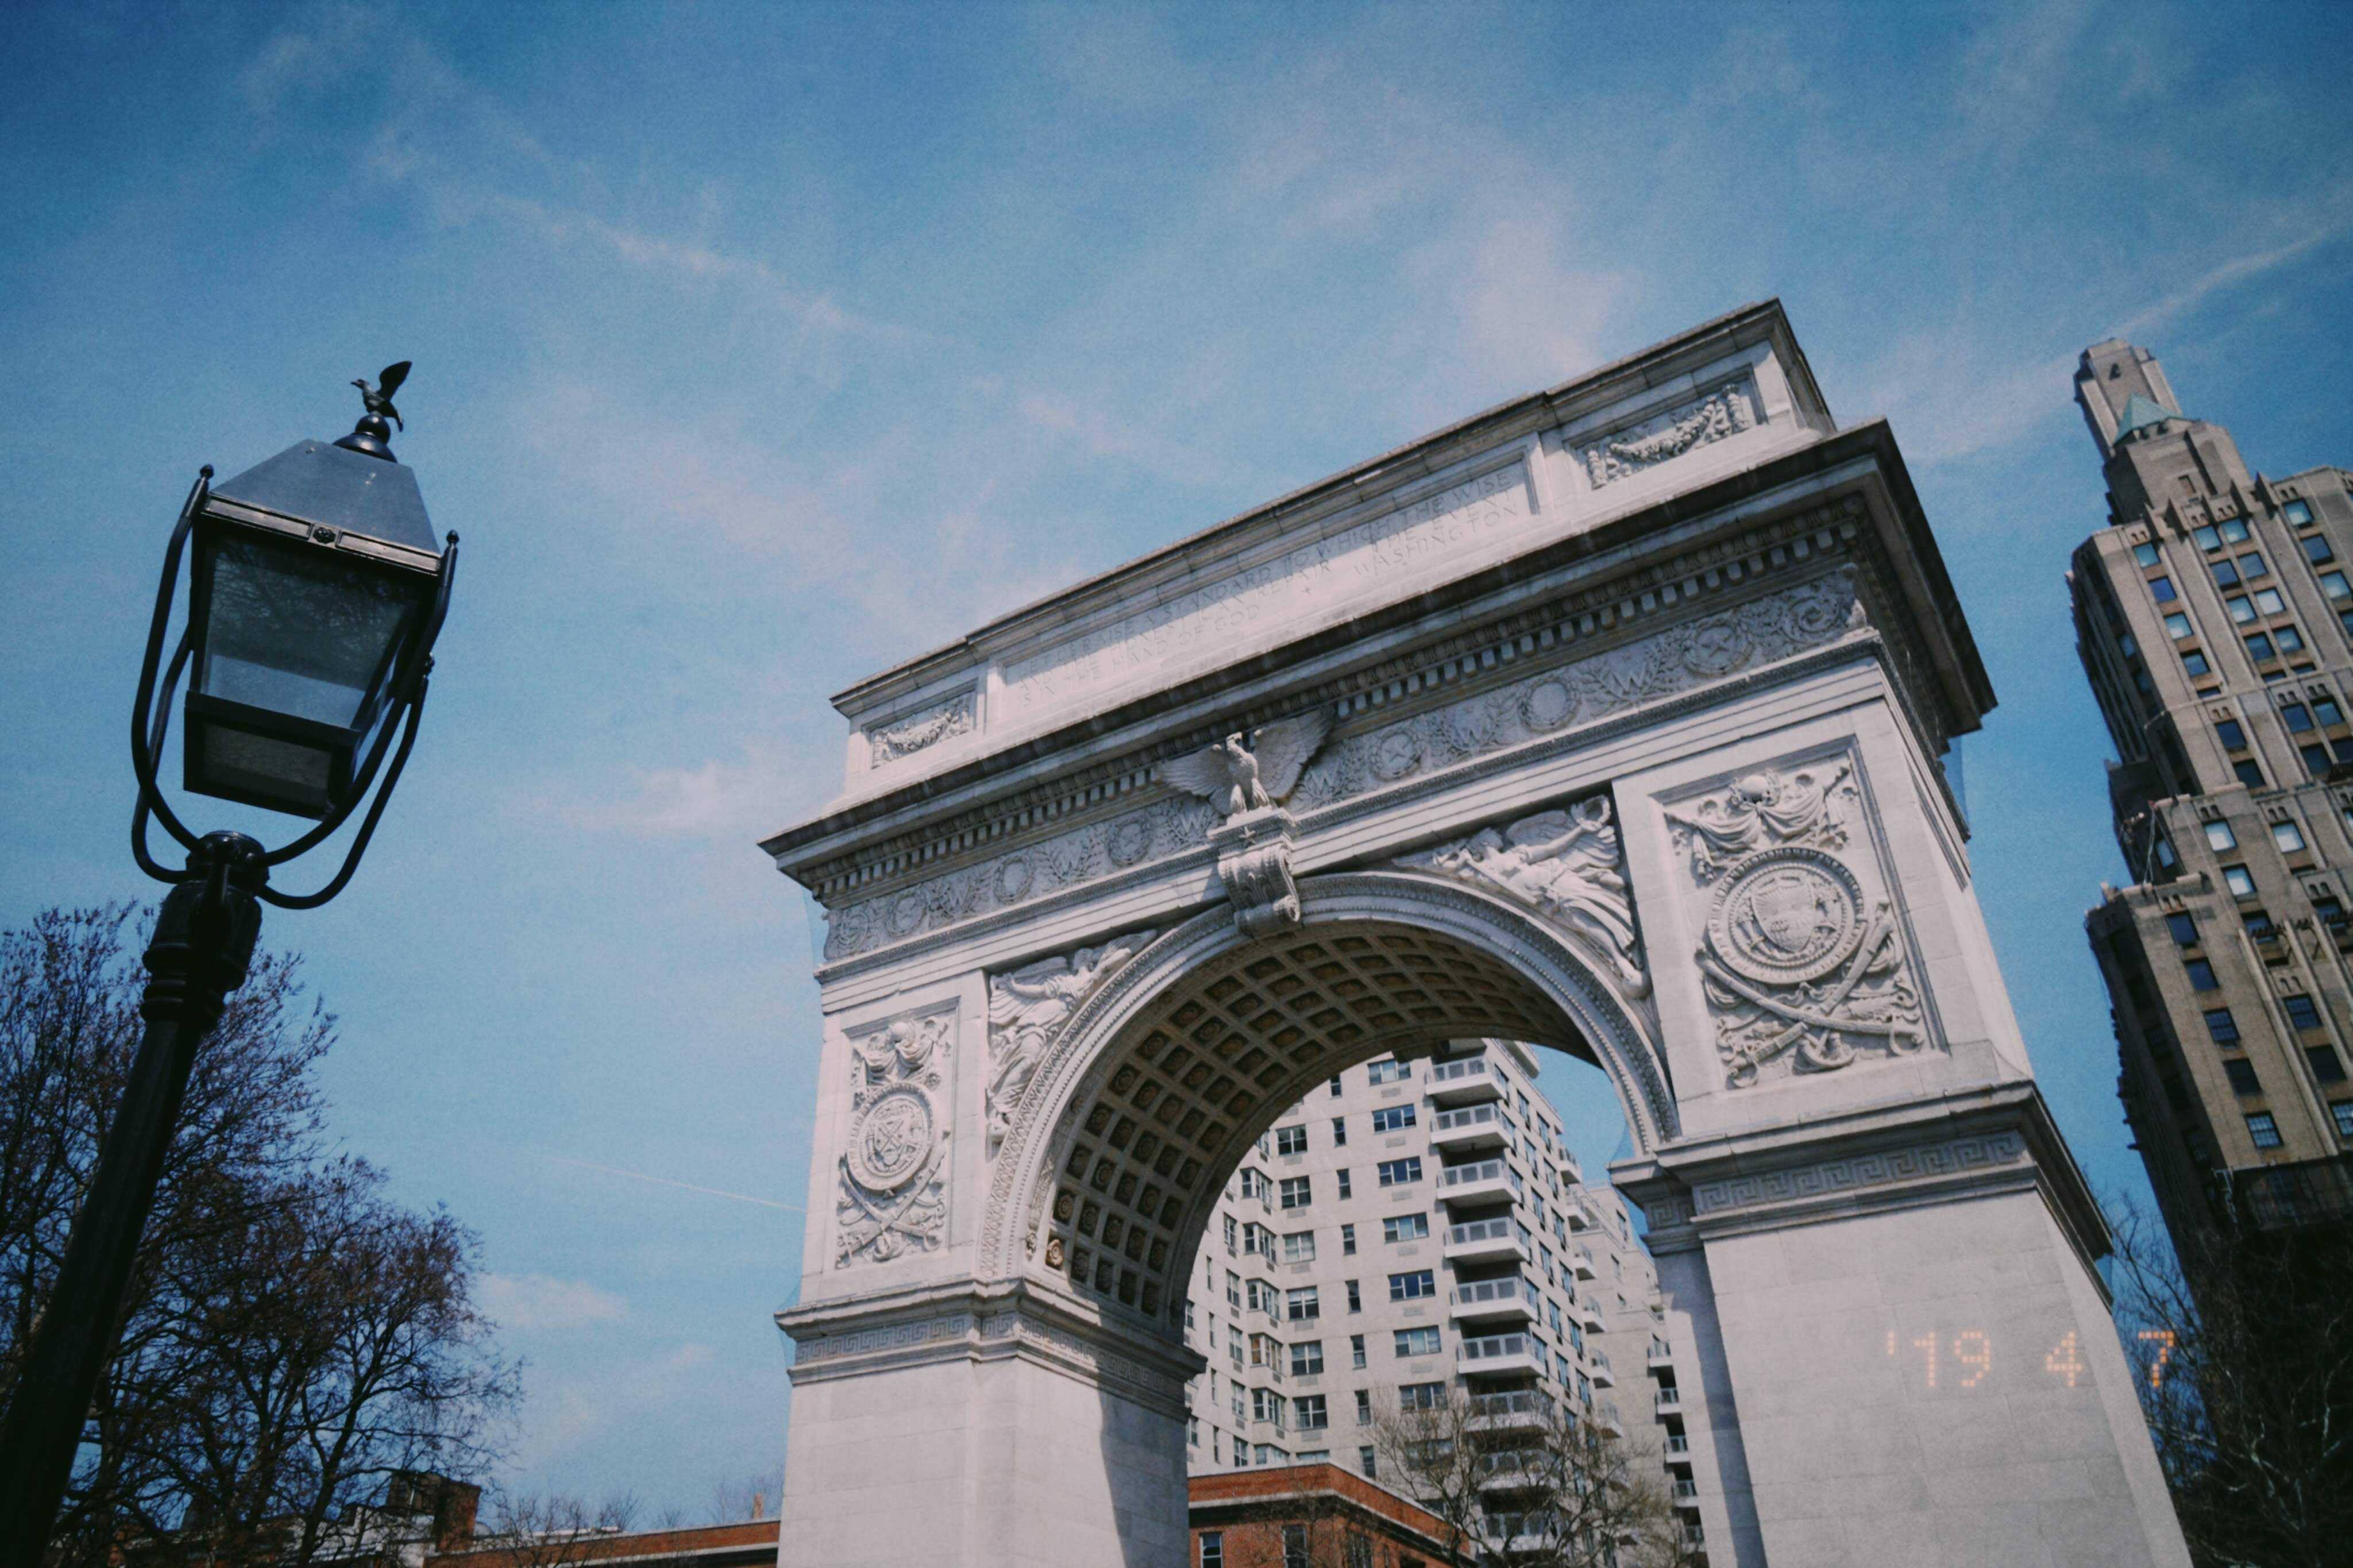 Washington Square Arch in NYC